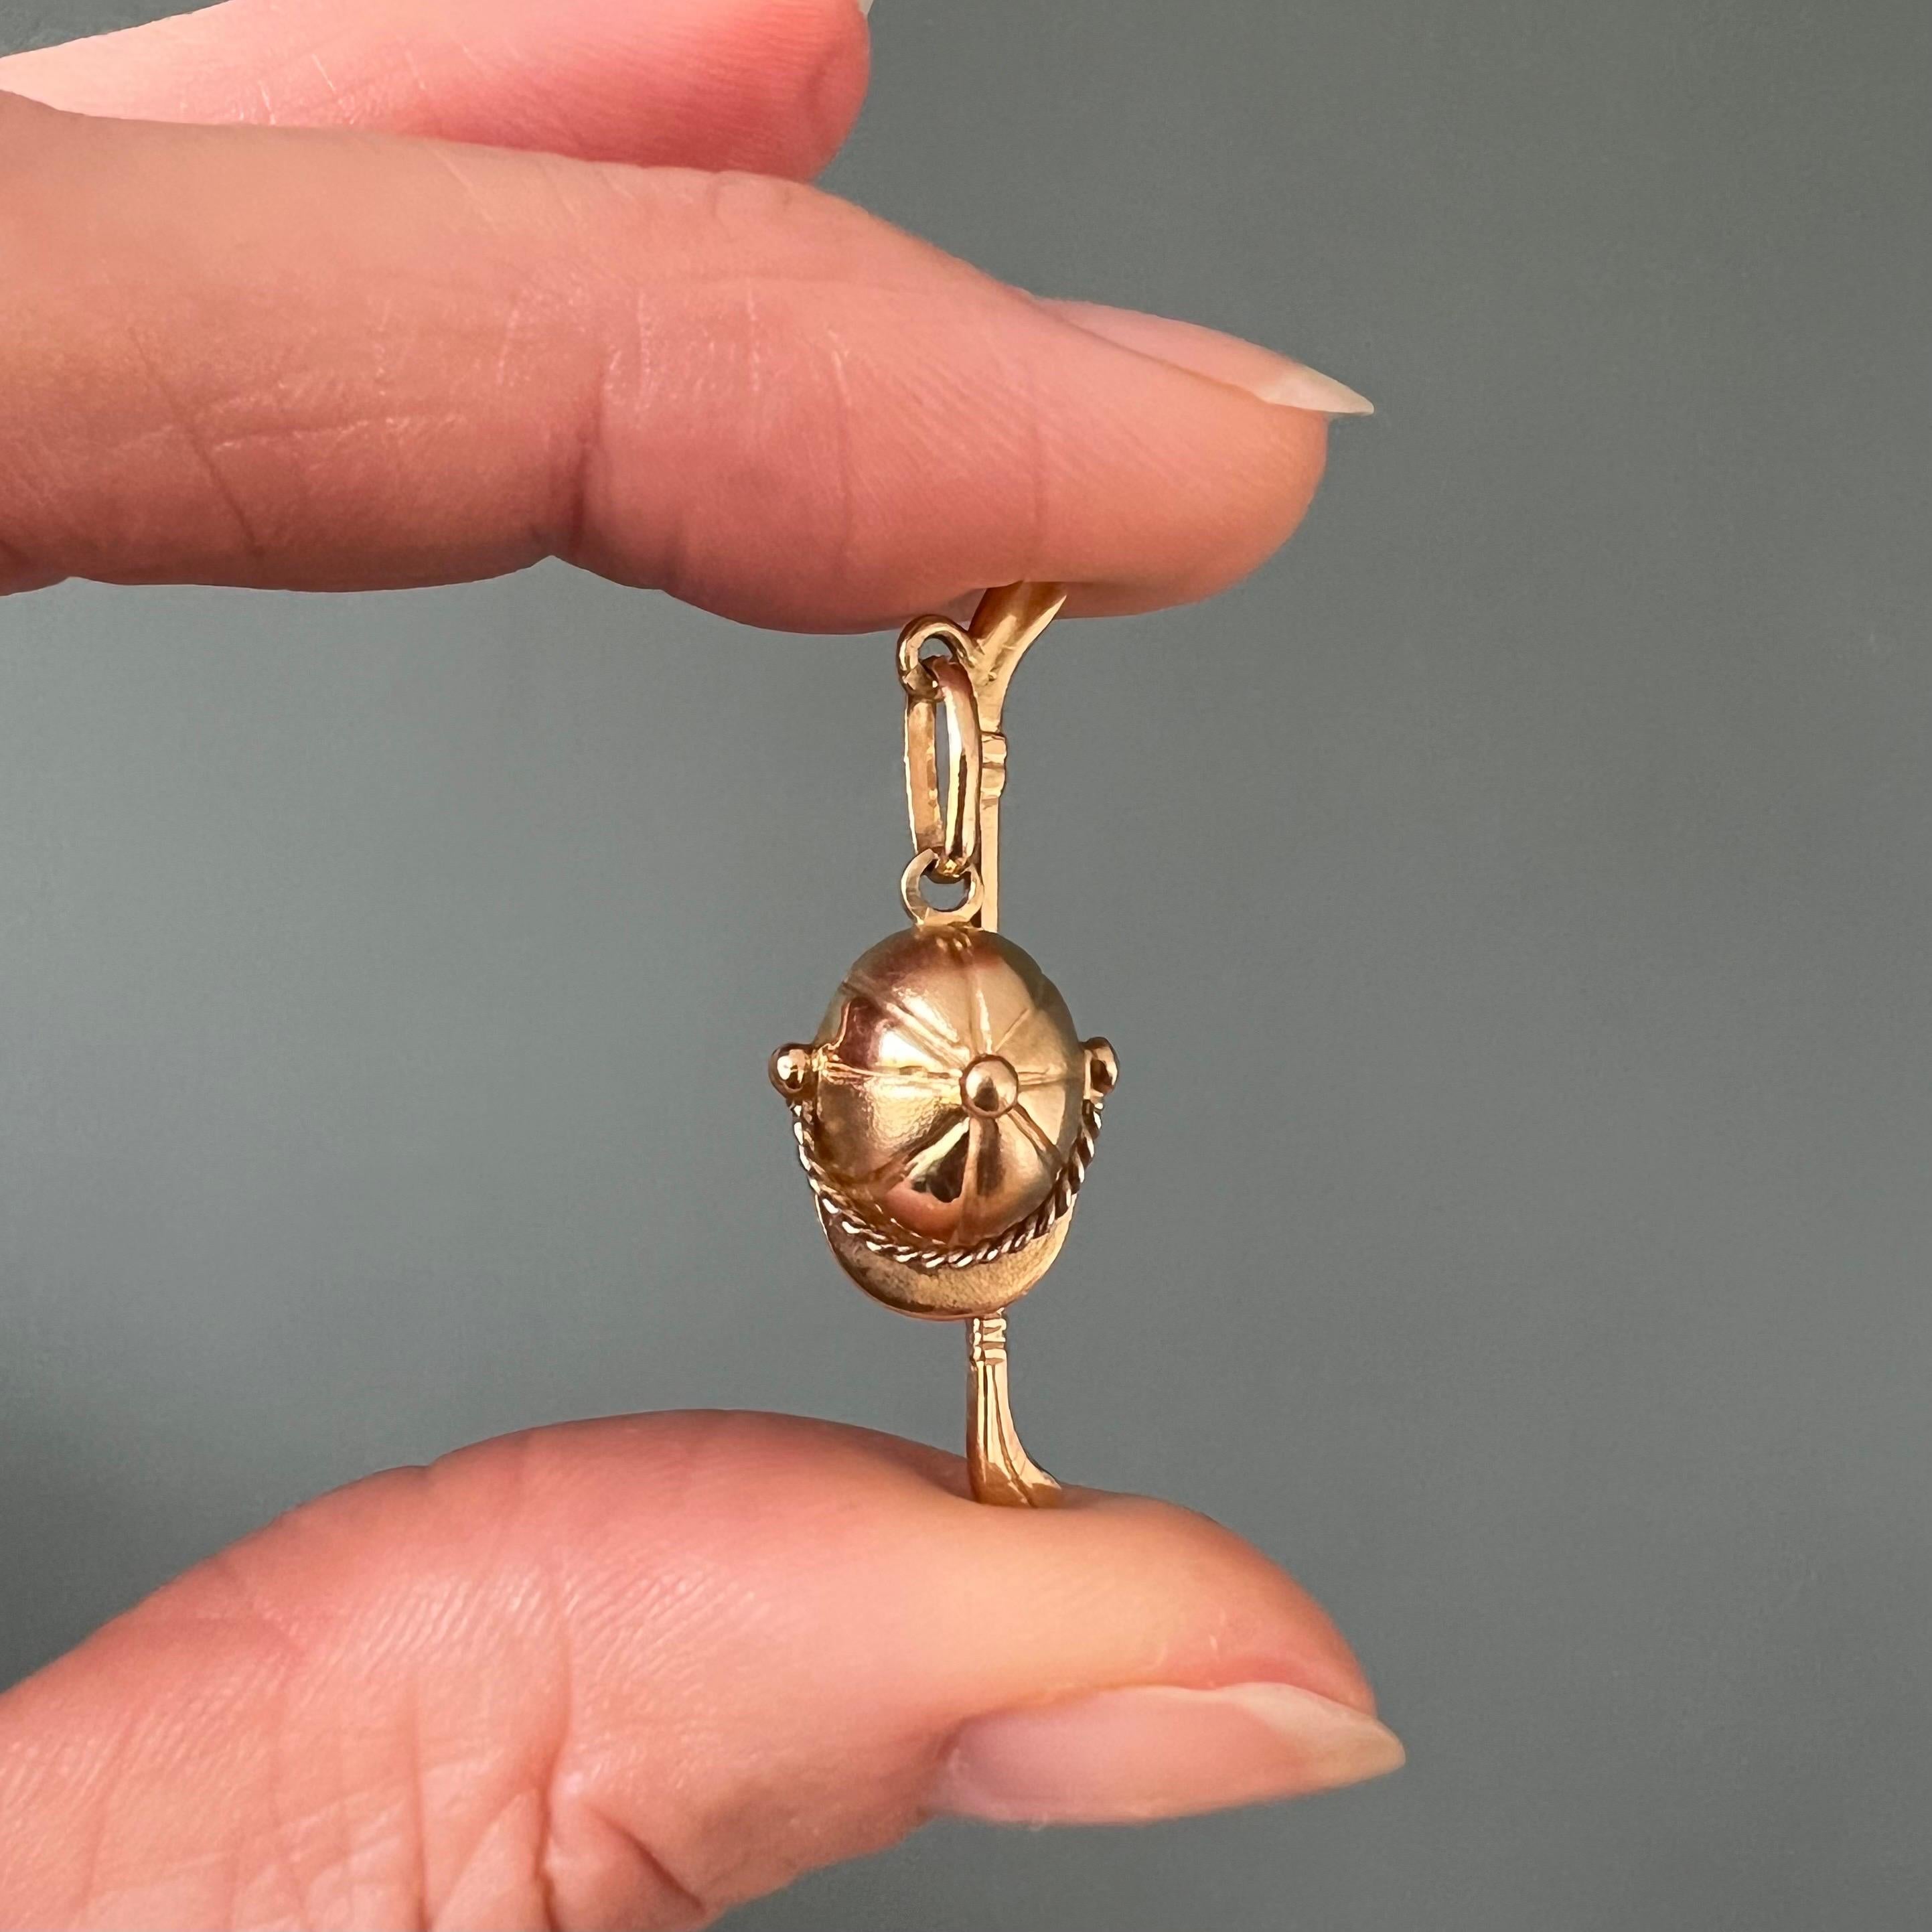 This is a vintage horse polo riders equipment charm pendant, consisting of a riding helmet and polo stick. The 18 karat yellow gold riders helmet and polo stick are beautifully crafted and detailed. The helmet has a rope band above the visor and